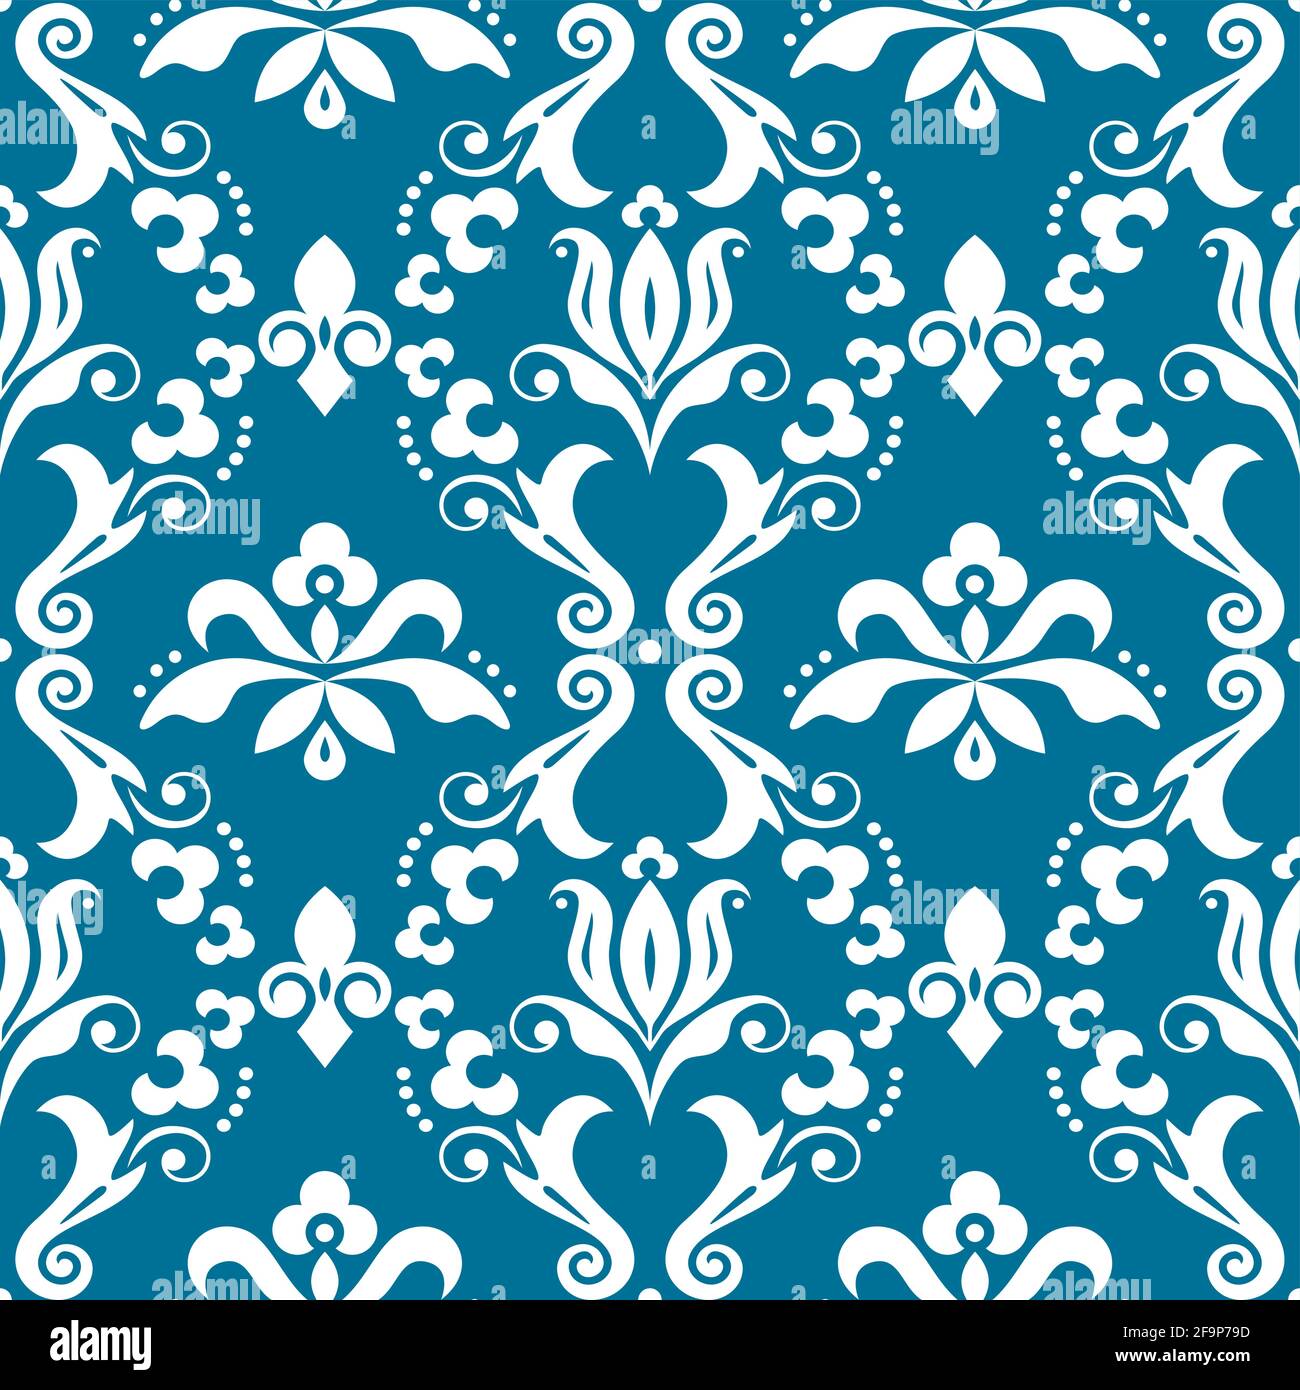 Damask elegant vector seamless pattern, victorian textile or fabric print design with flowers, swirls and leaves in white on turquoise Stock Vector